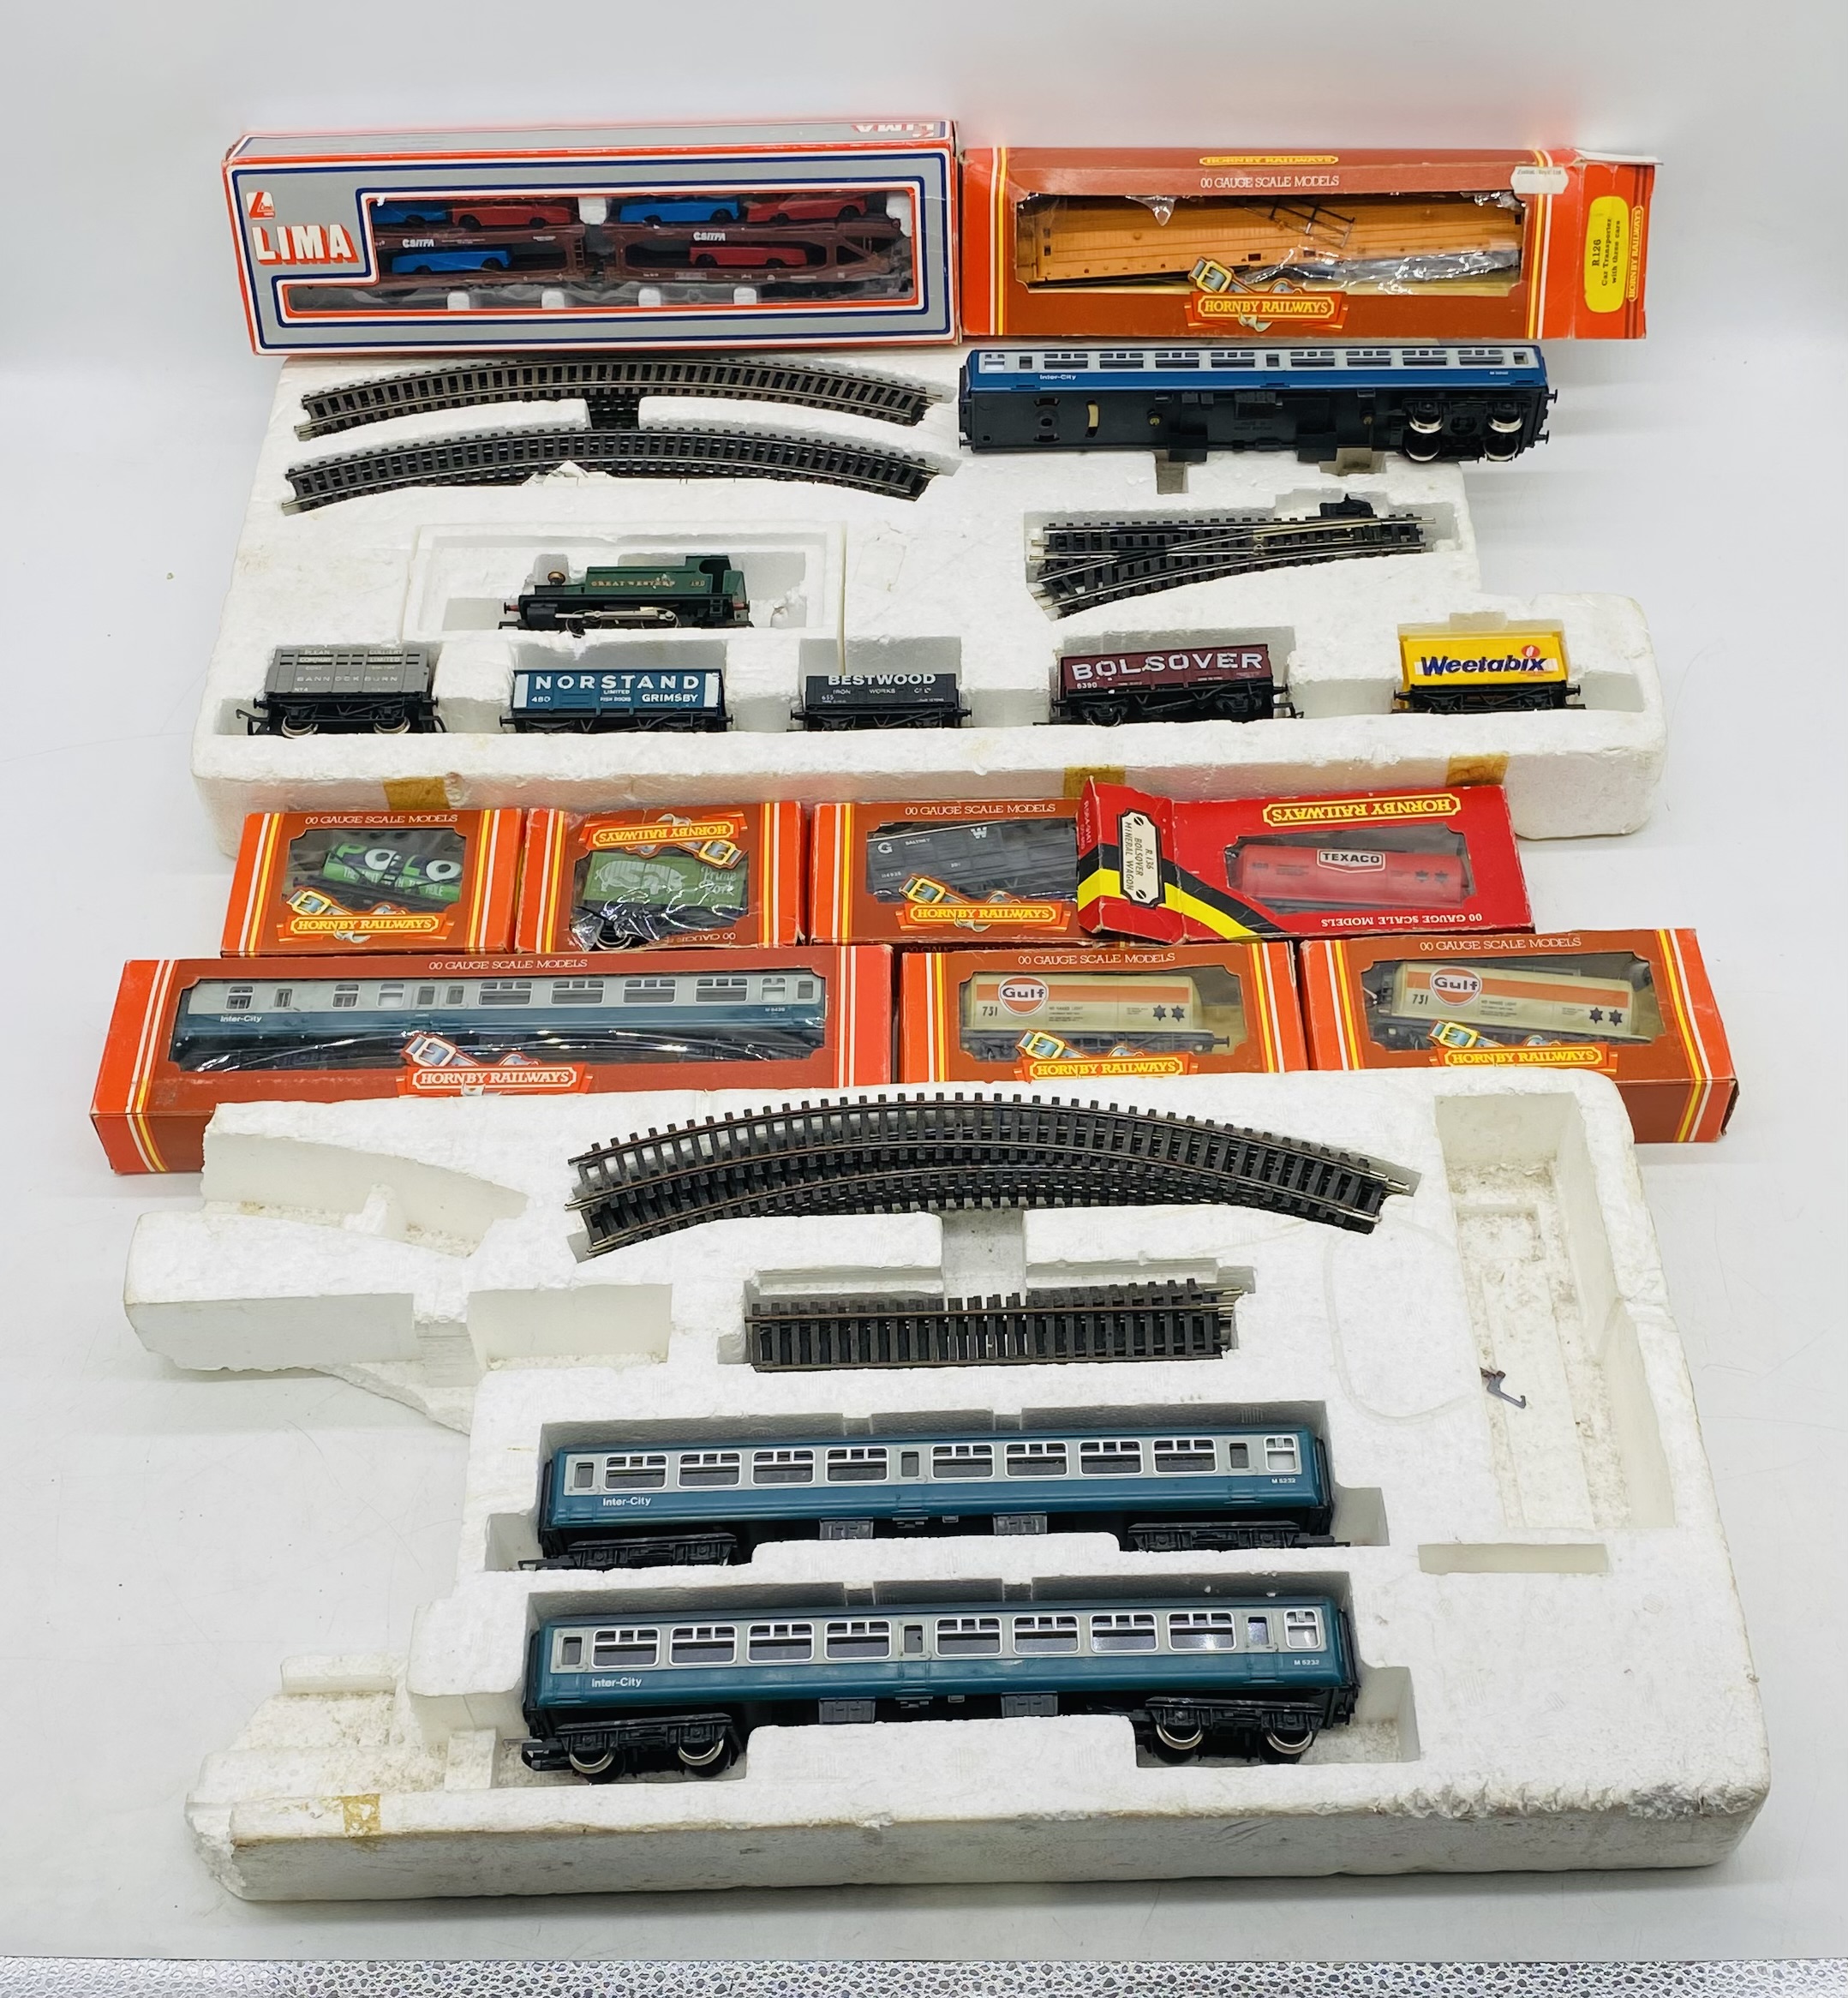 A collection of model railway OO gauge rolling stock, carriages, track and single locomotive.